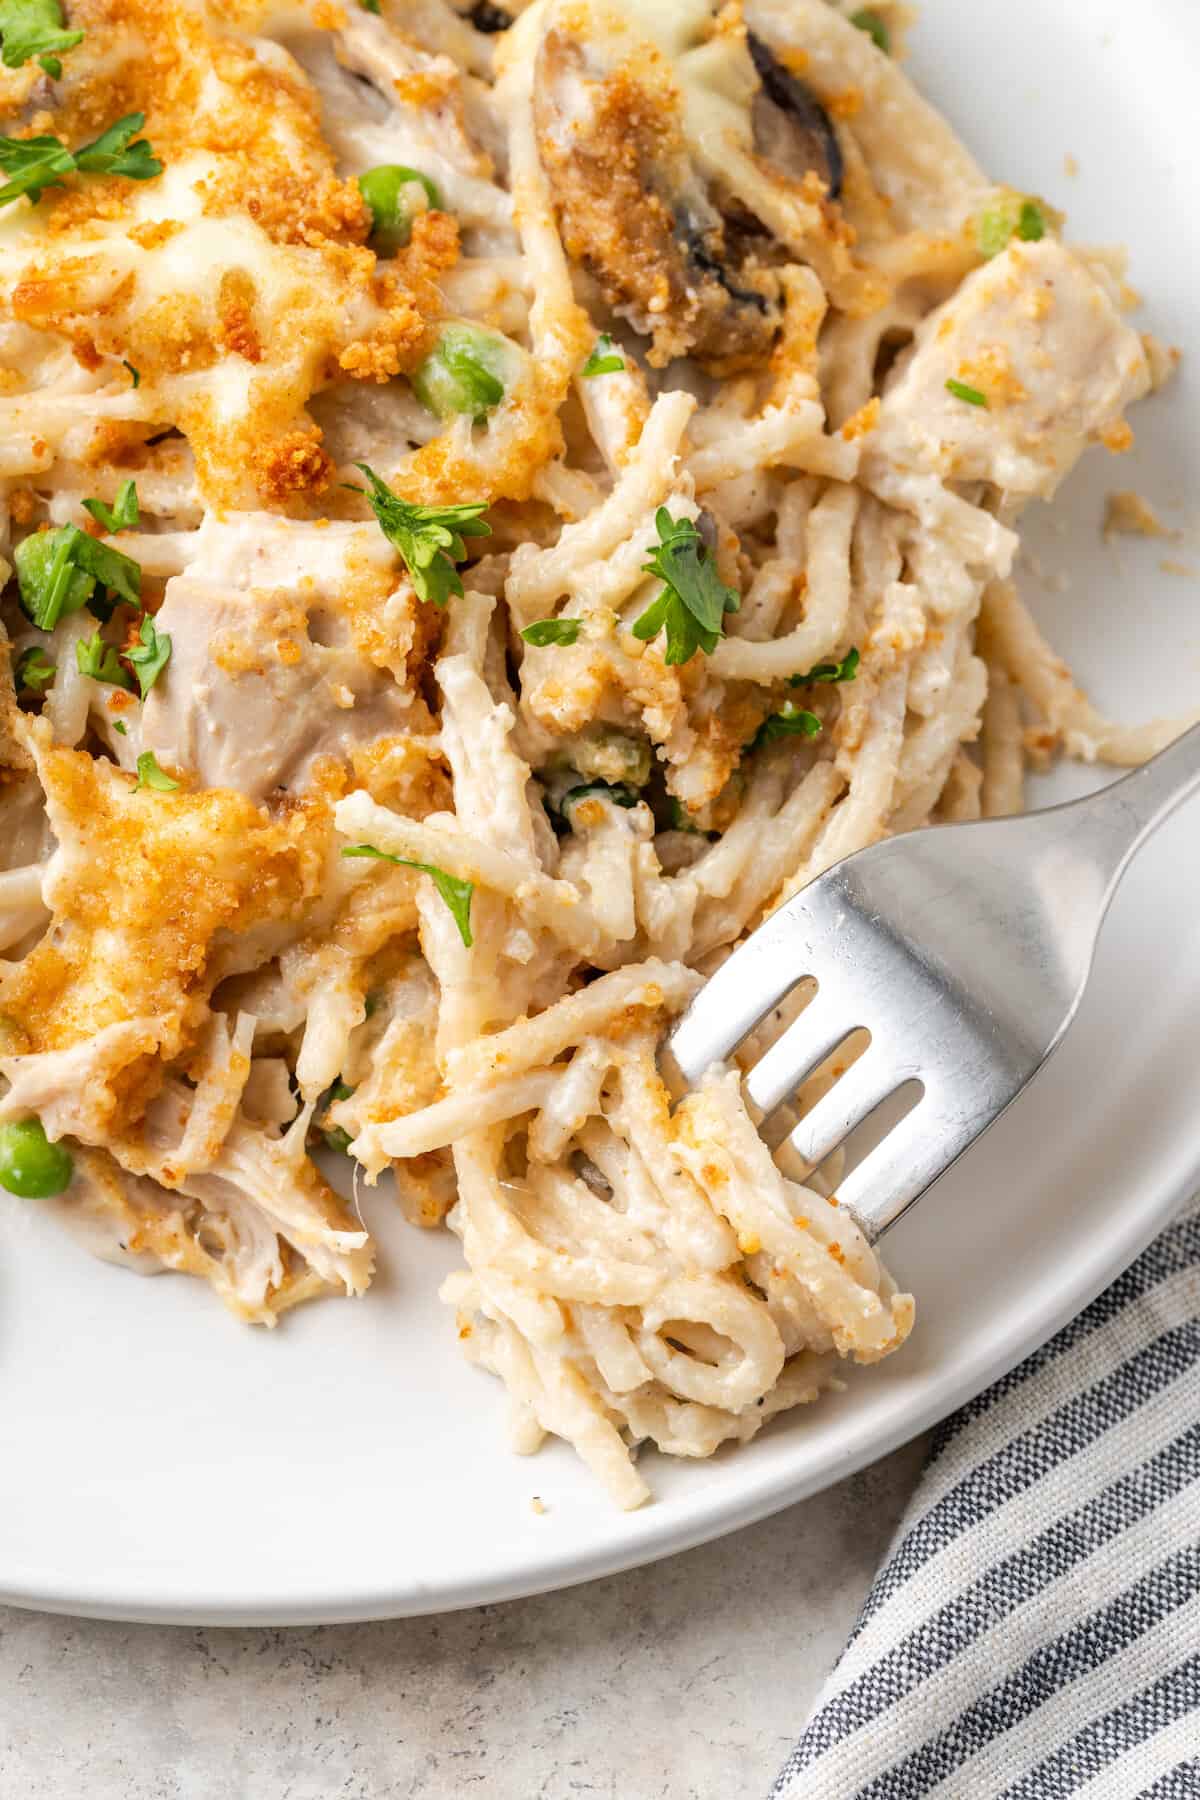 A plate of chicken tetrazzini with a fork.